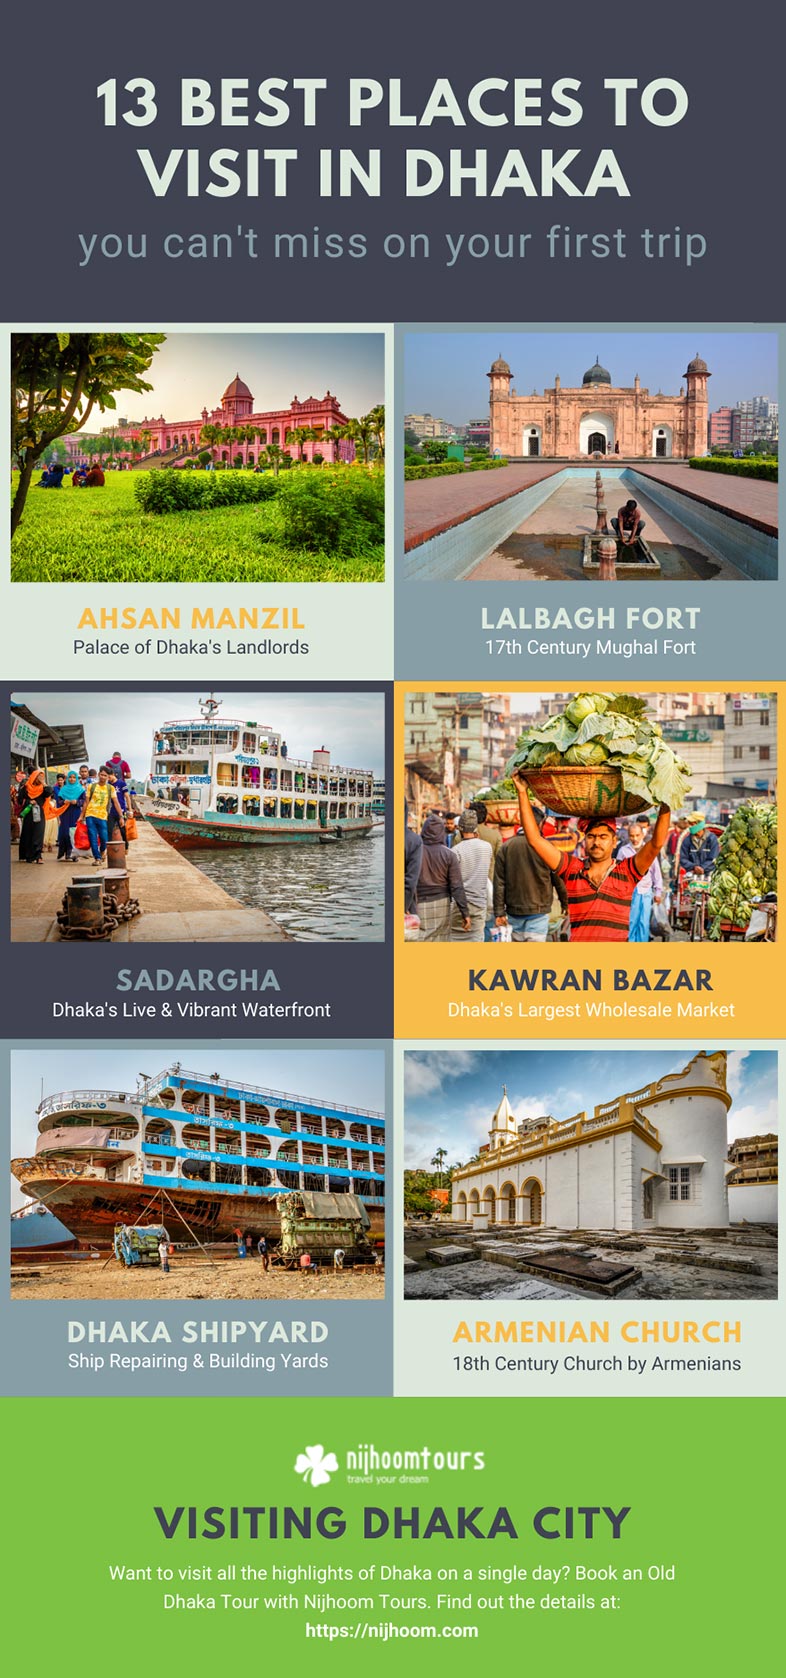 An infographic on 13 best places to visit in Dhaka you can't miss on your frirst trip